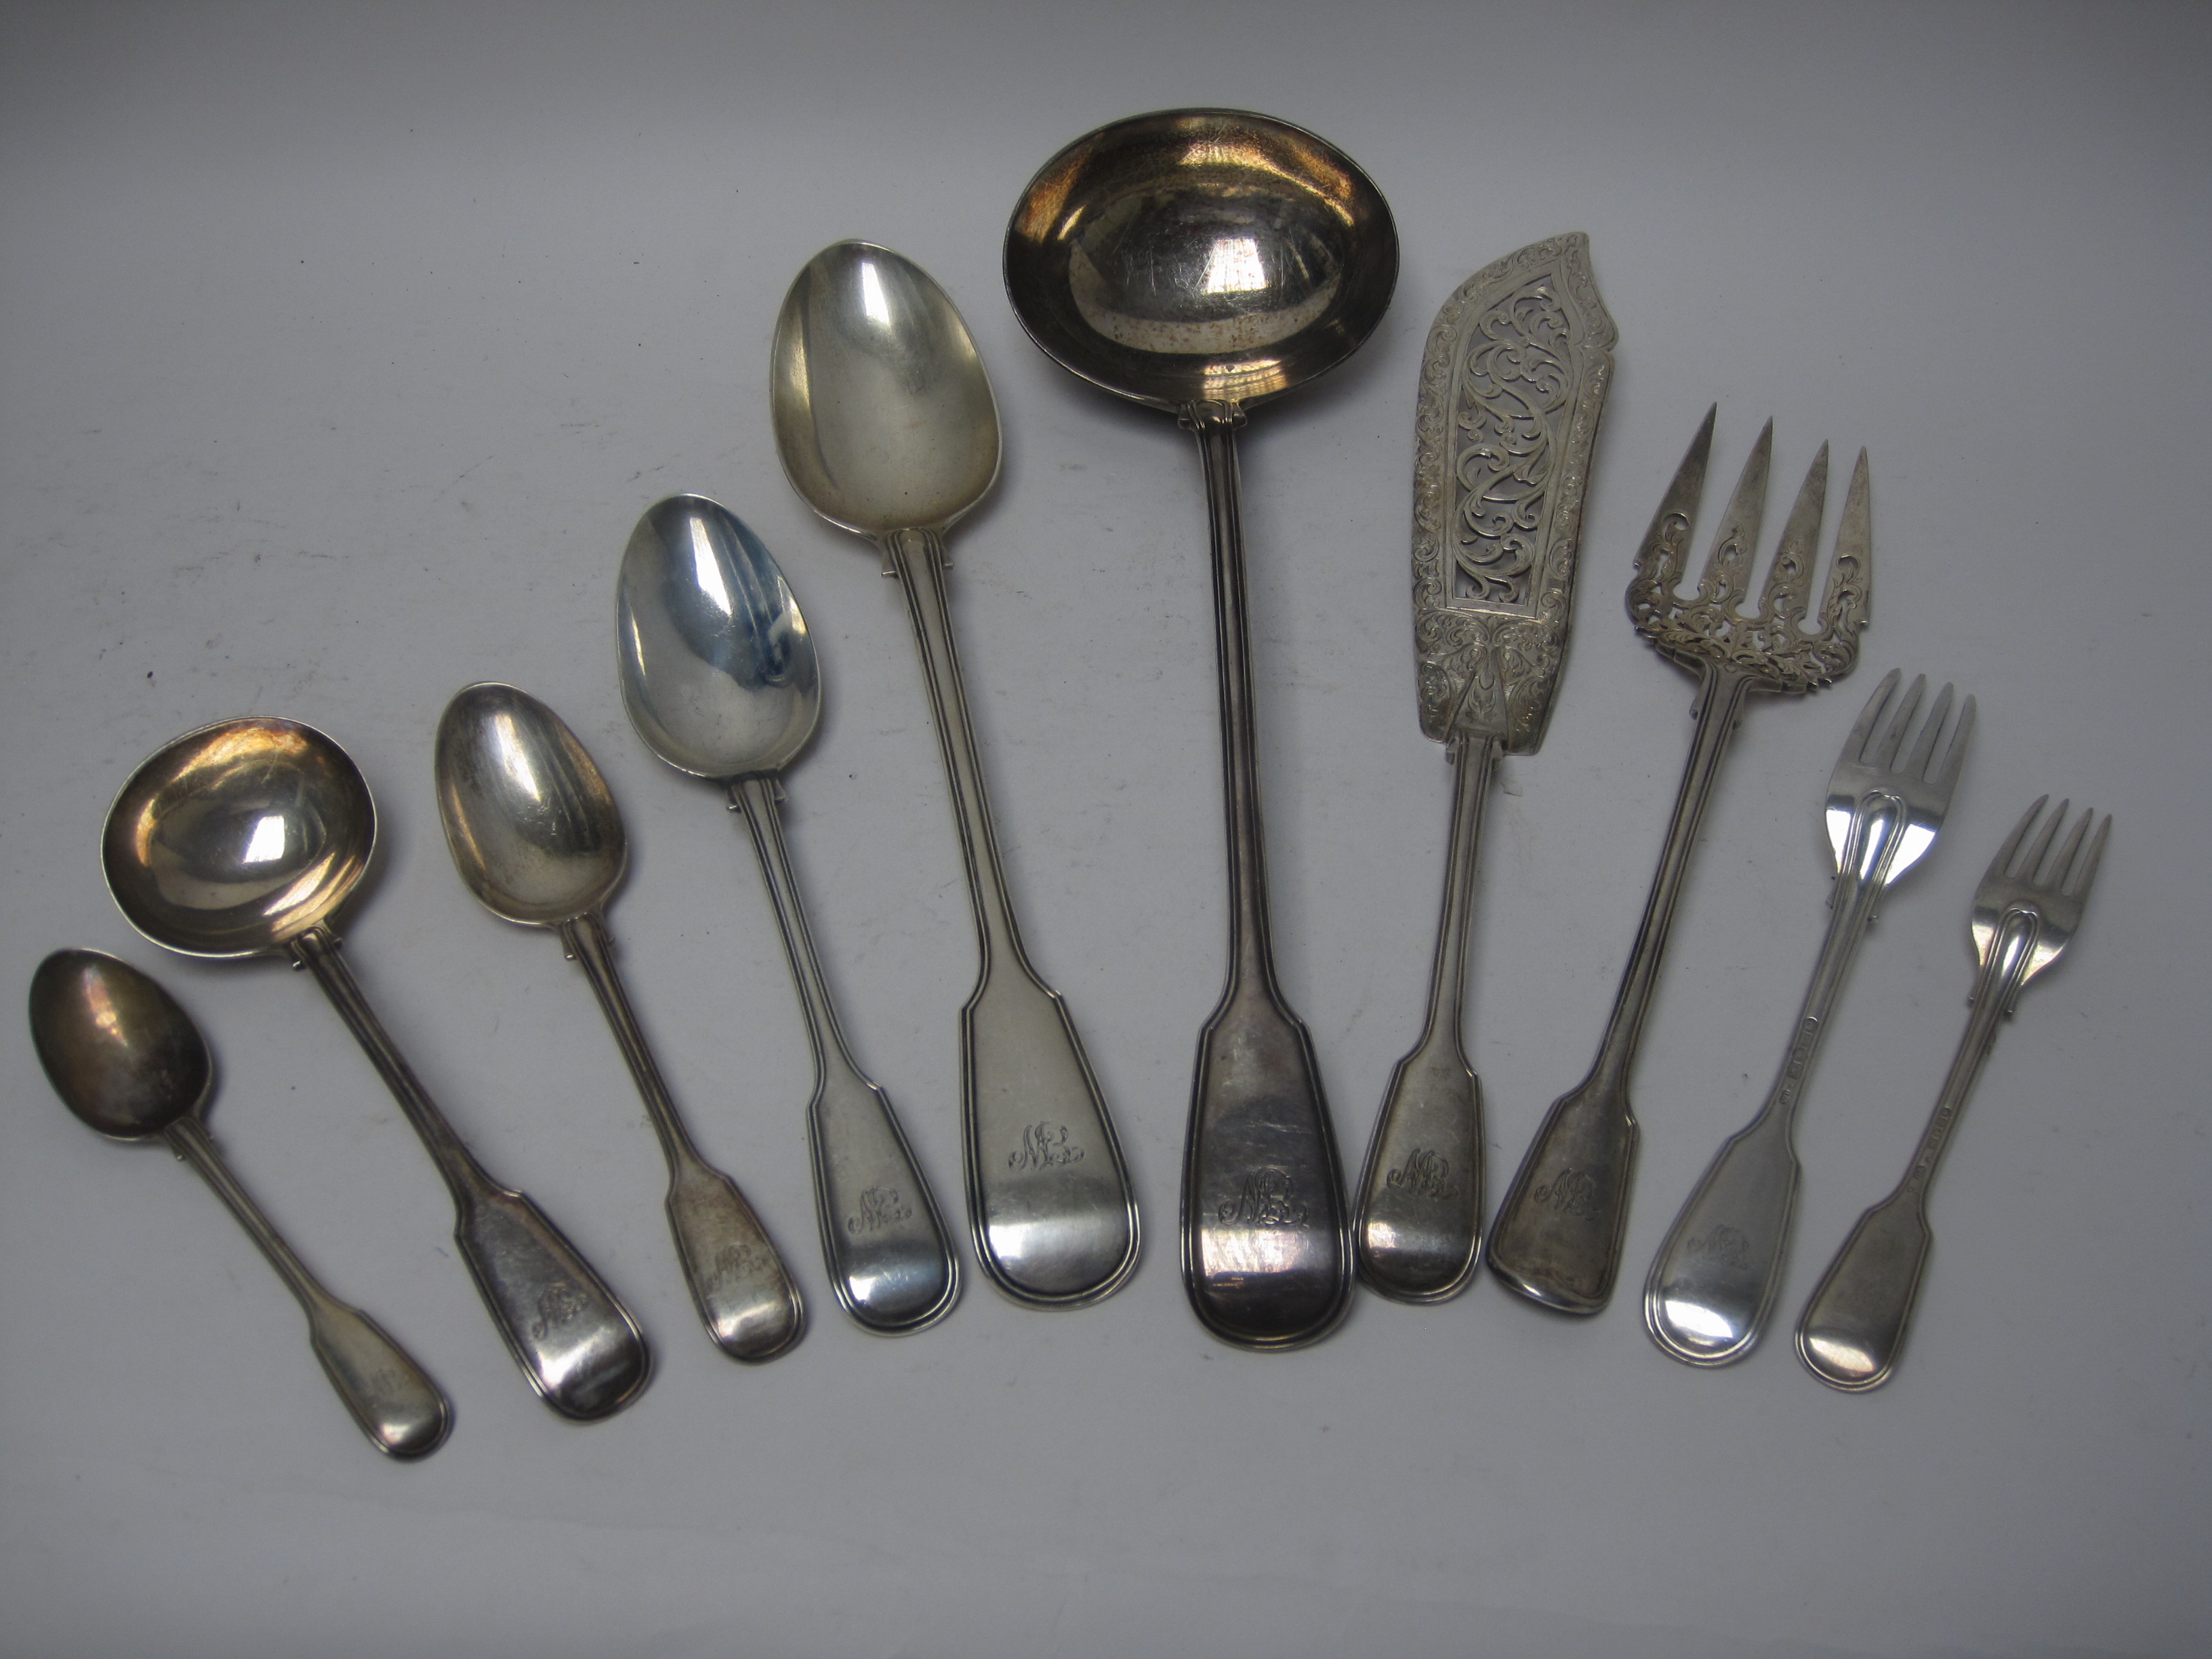 A matched set of Victorian silver Cutlery, fiddle and thread pattern engraved initials E.W.,